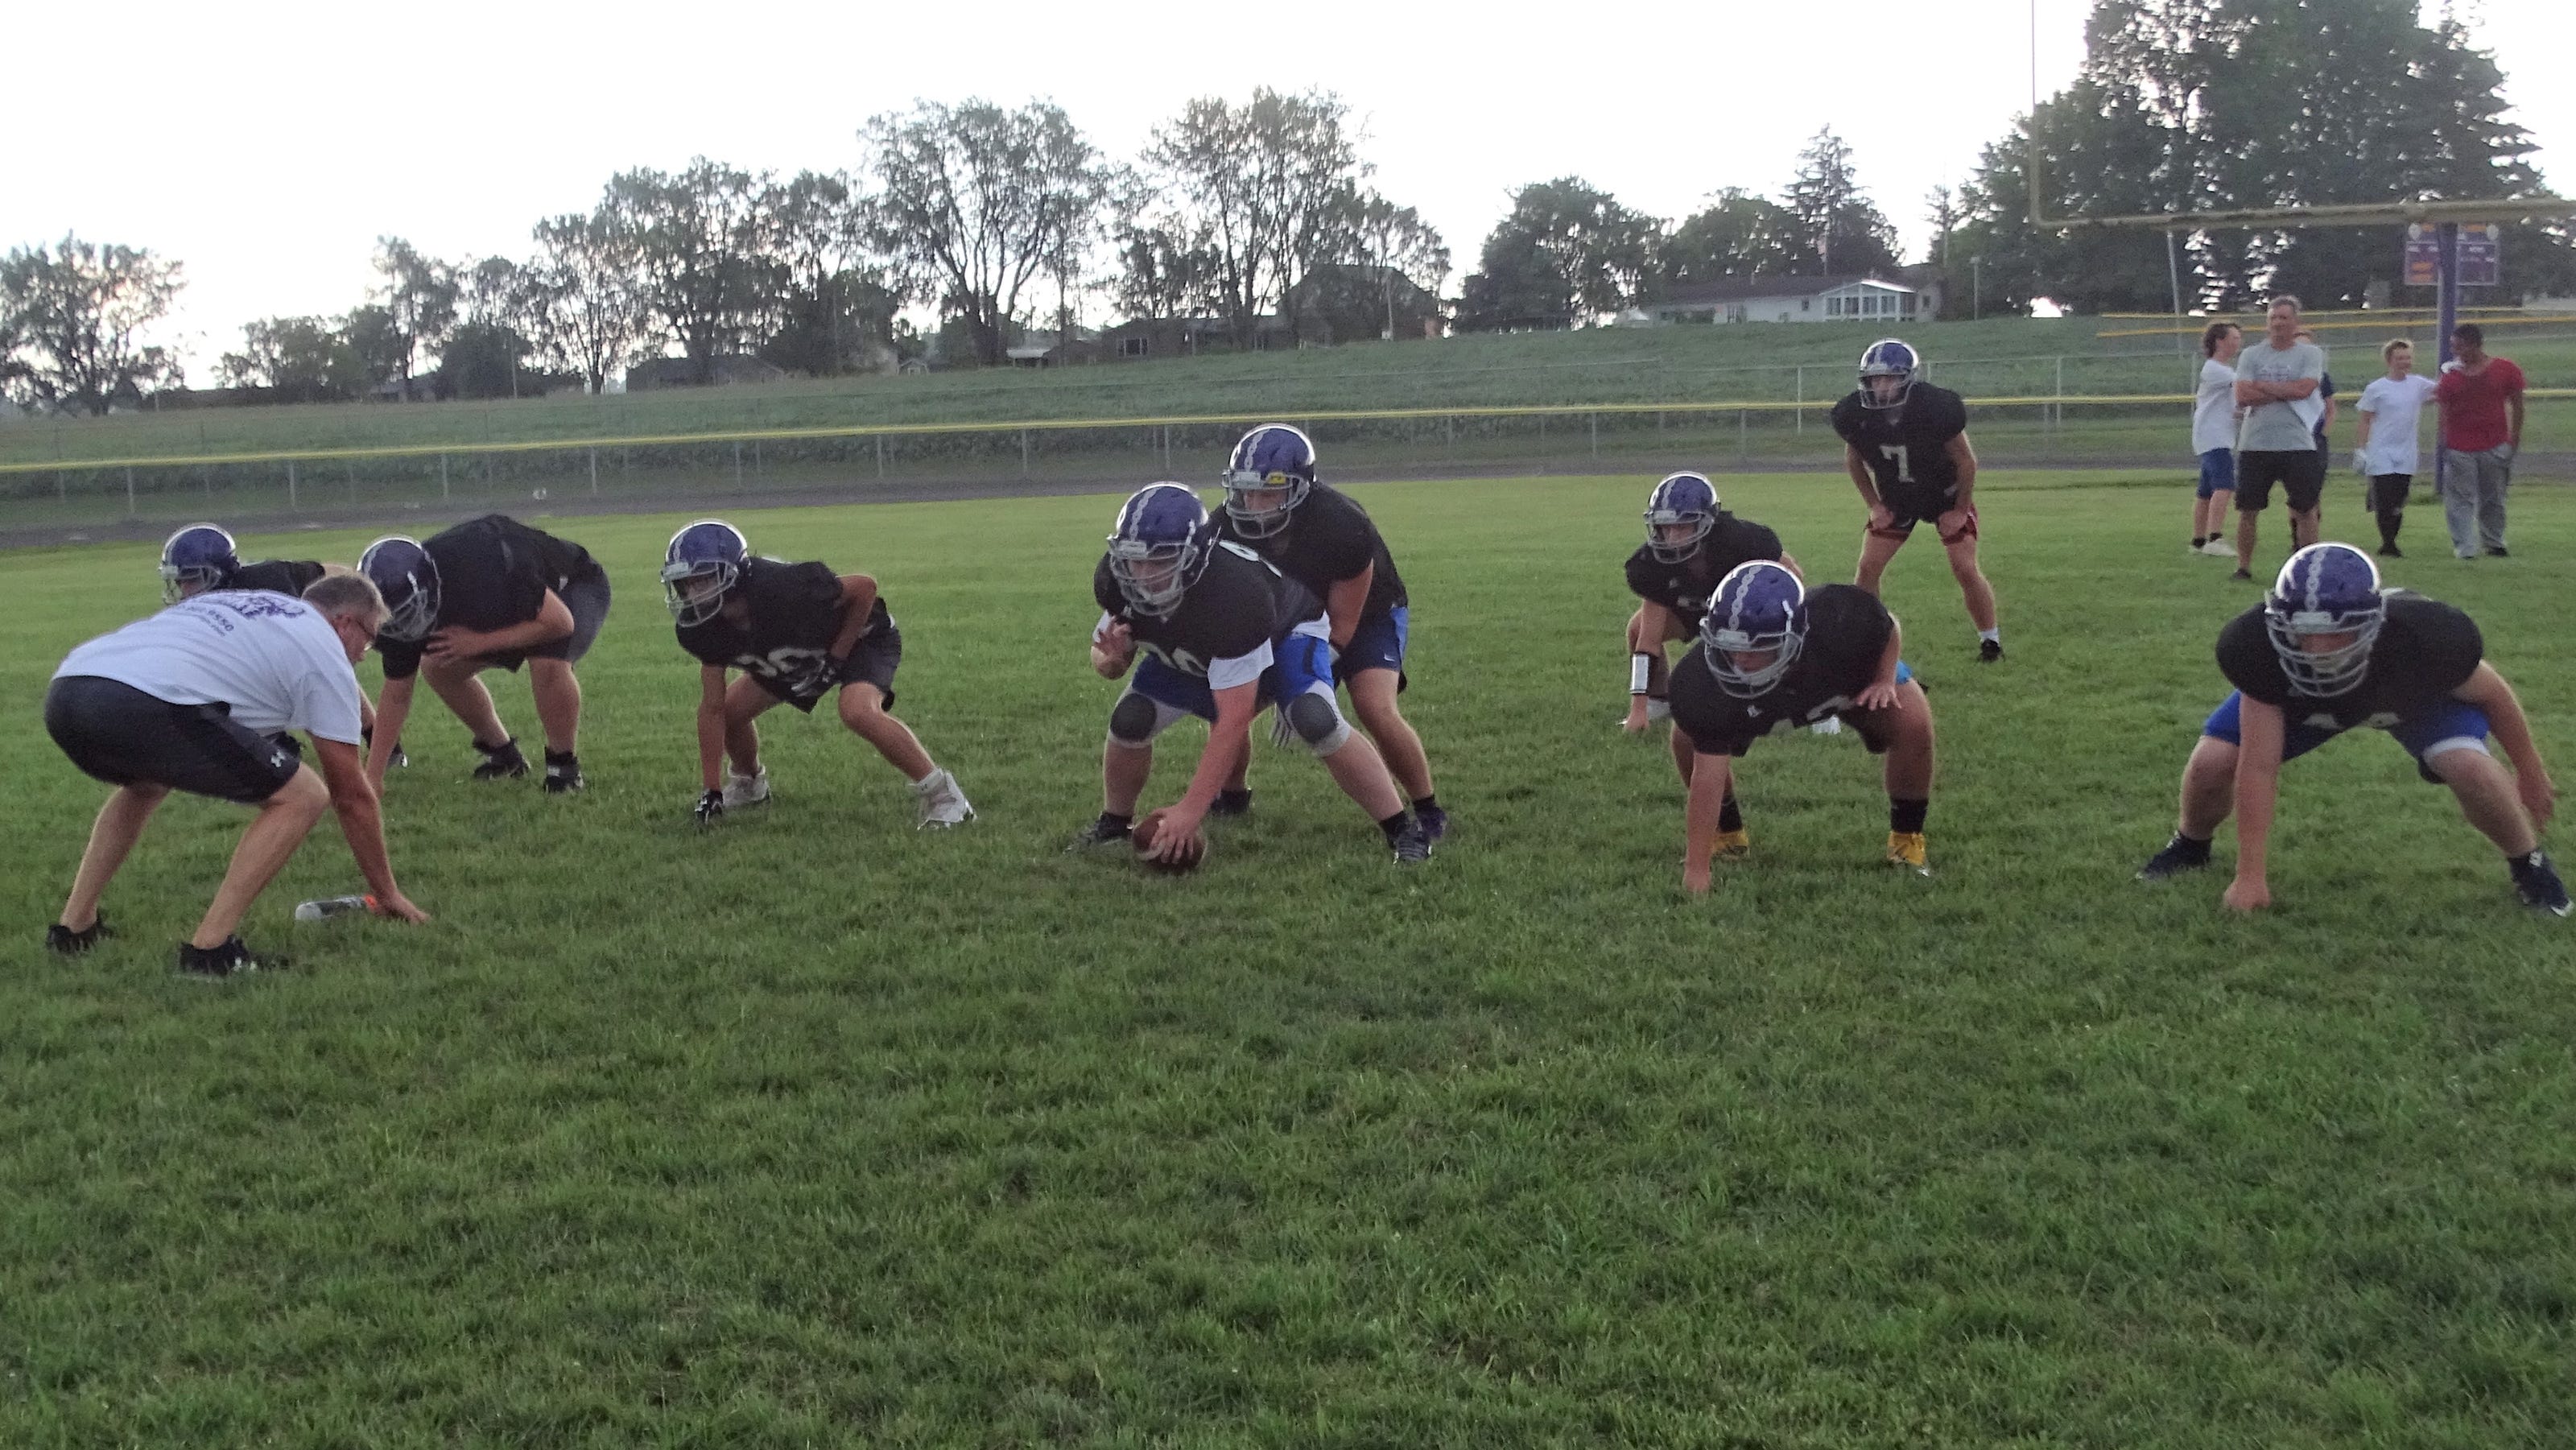 Friday Night Lights are back as Millersport brings back football